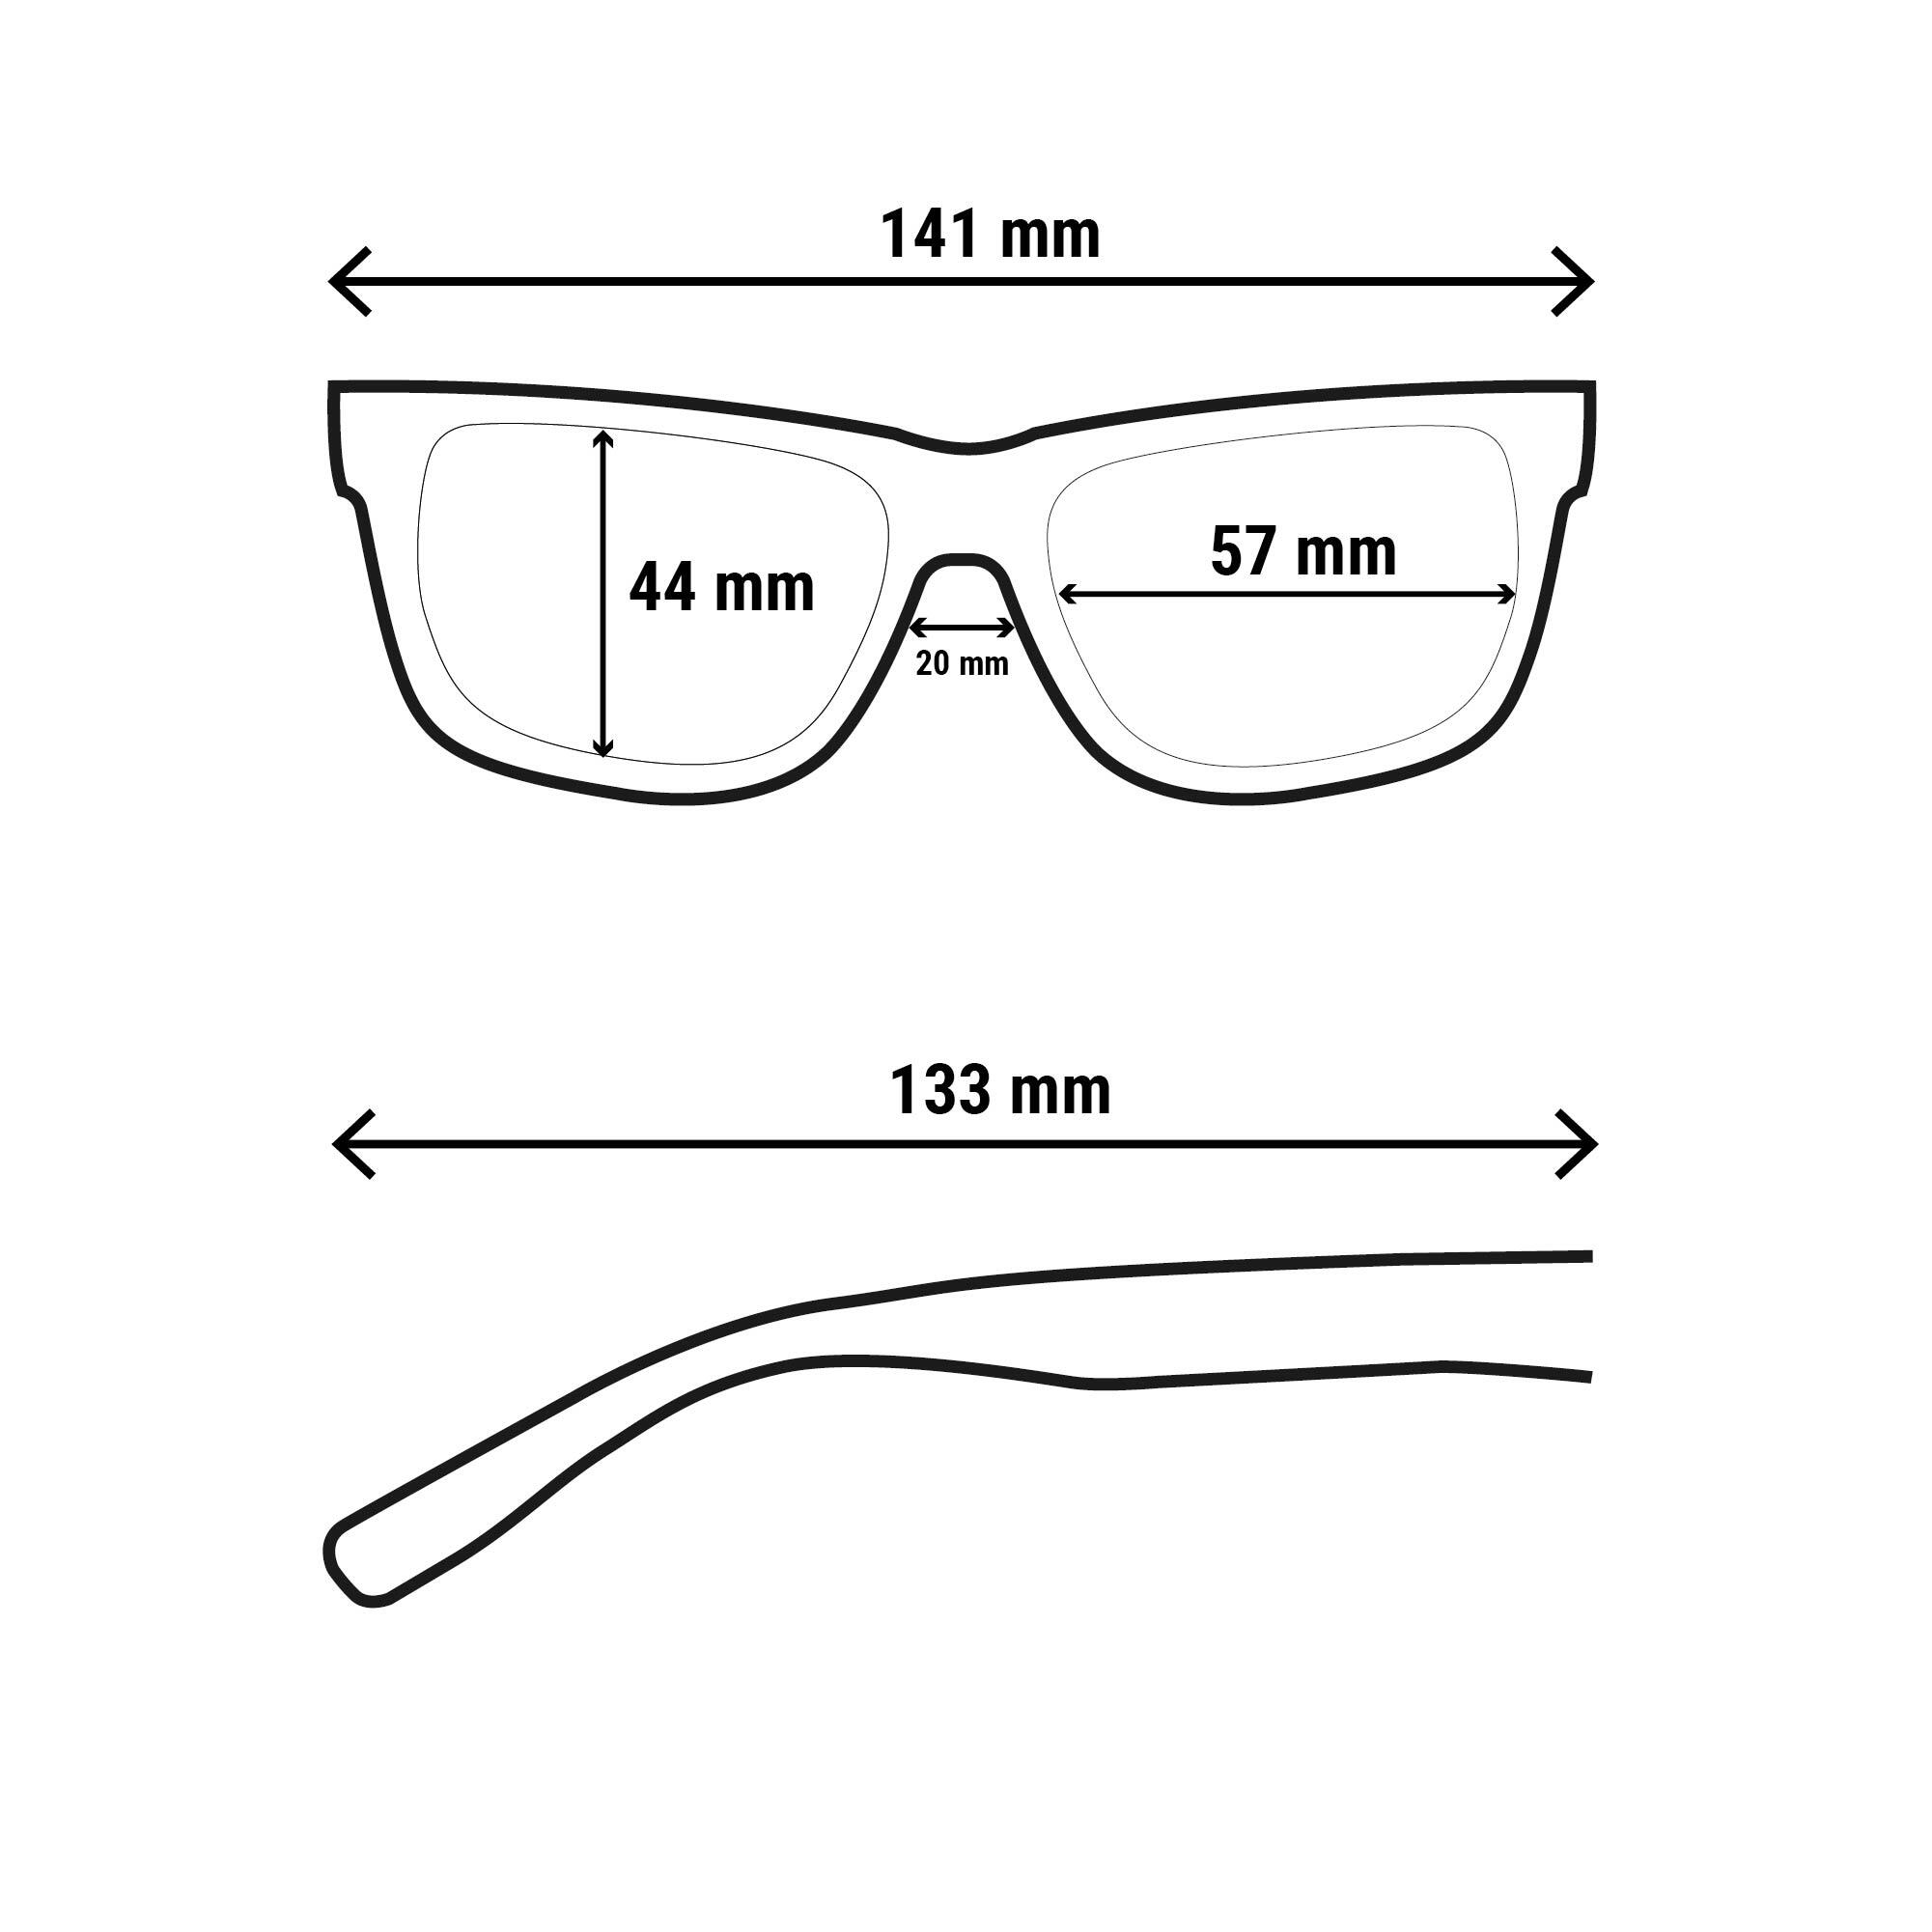 Adult - Hiking Sunglasses - MH160 - Category 3 11/11